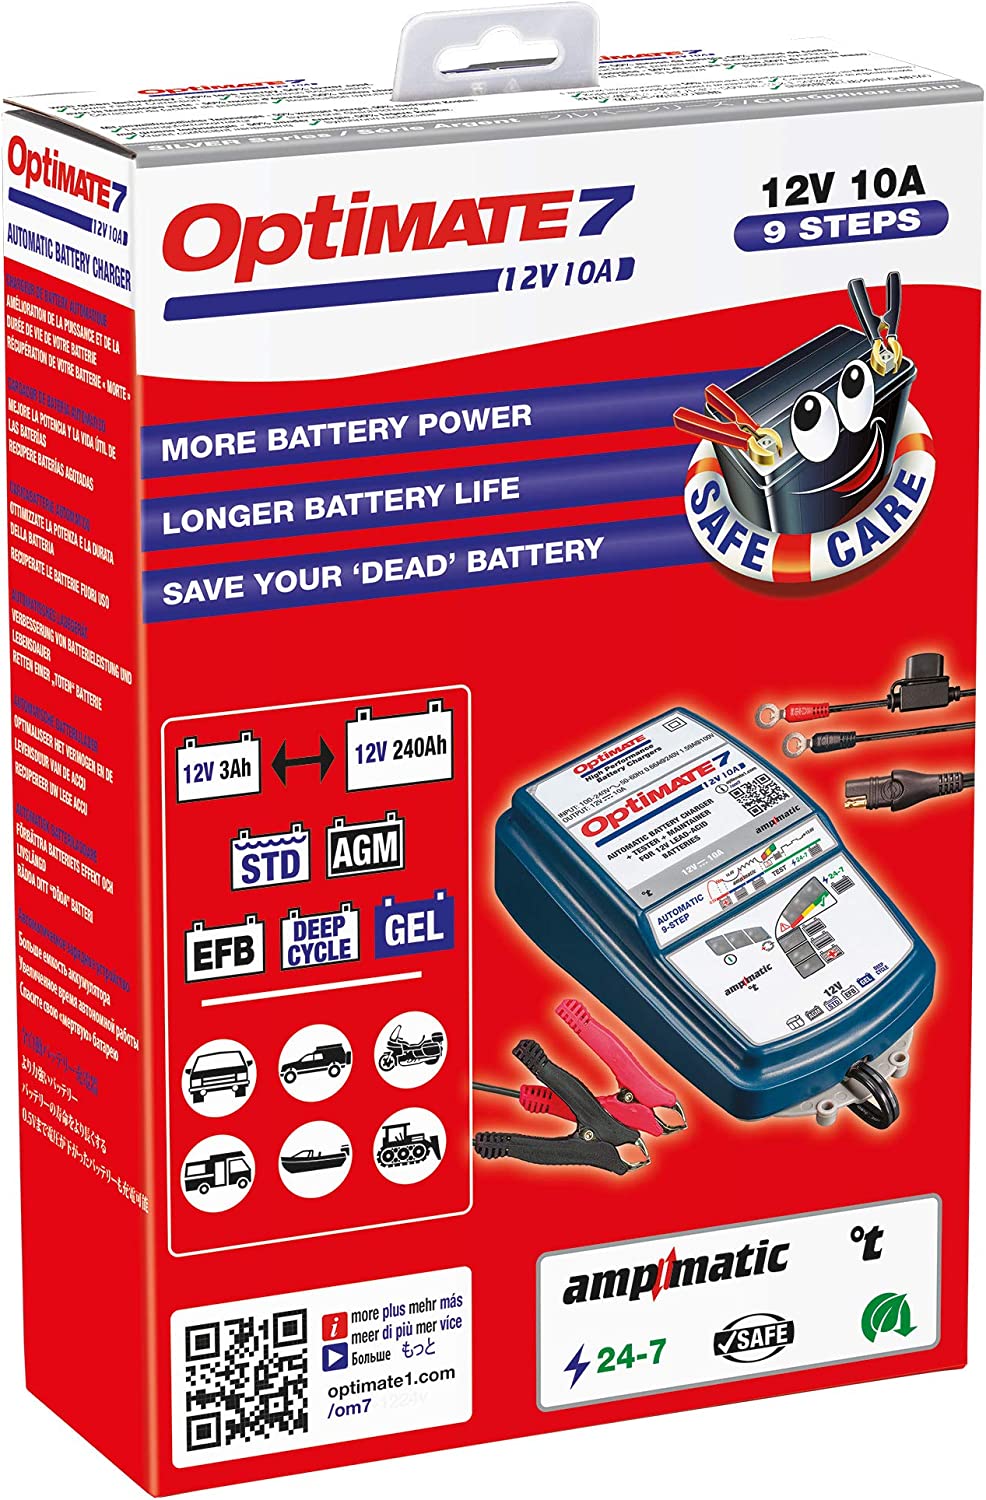 Tecmate Optimate 7 Ampmatic, TM-255v2, 9-Step 12V 10A Sealed Battery Saving Charger & maintainer